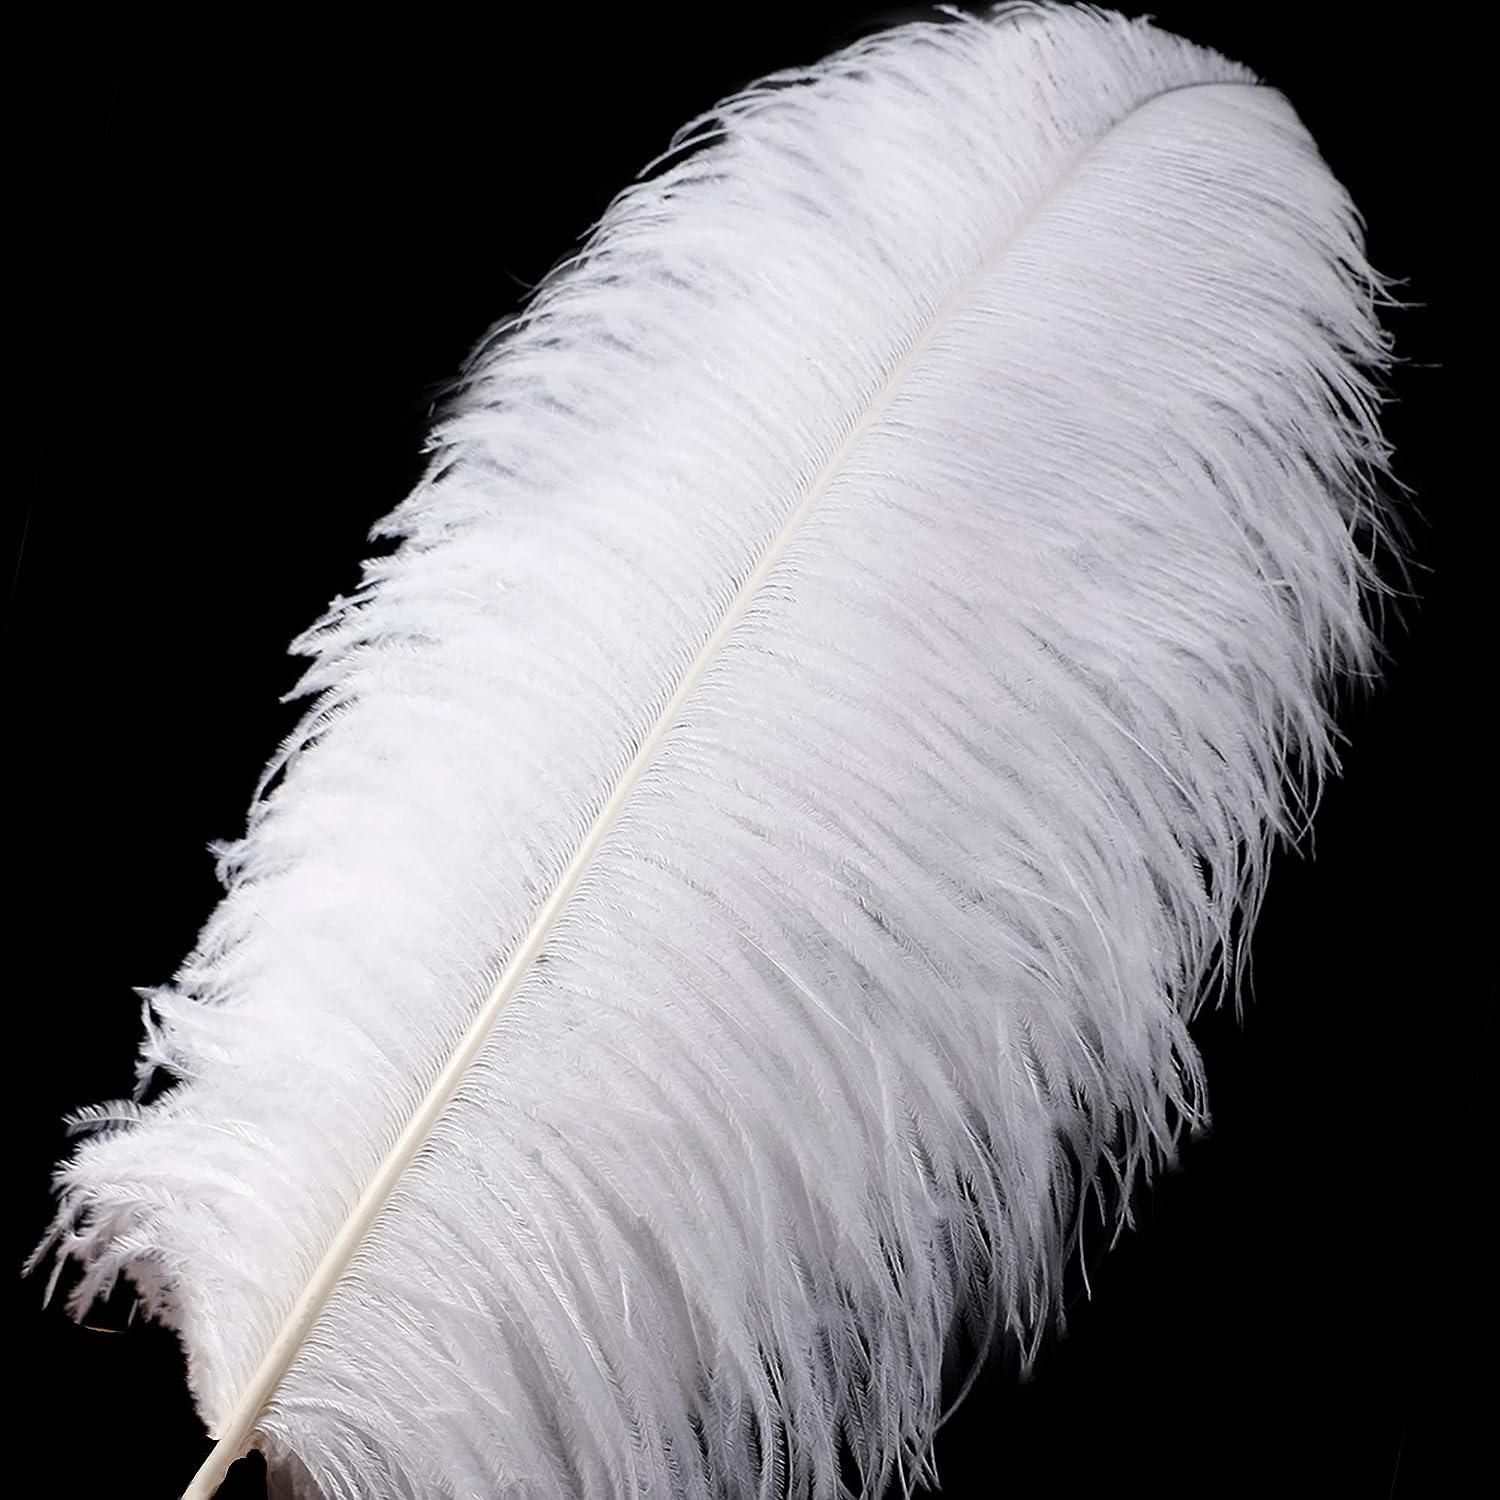 Larryhot White Large Ostrich Feathers - 16-18 inch 10pcs Feathers for Vase  Wedding Party Centerpieces and Home Decorations (White)